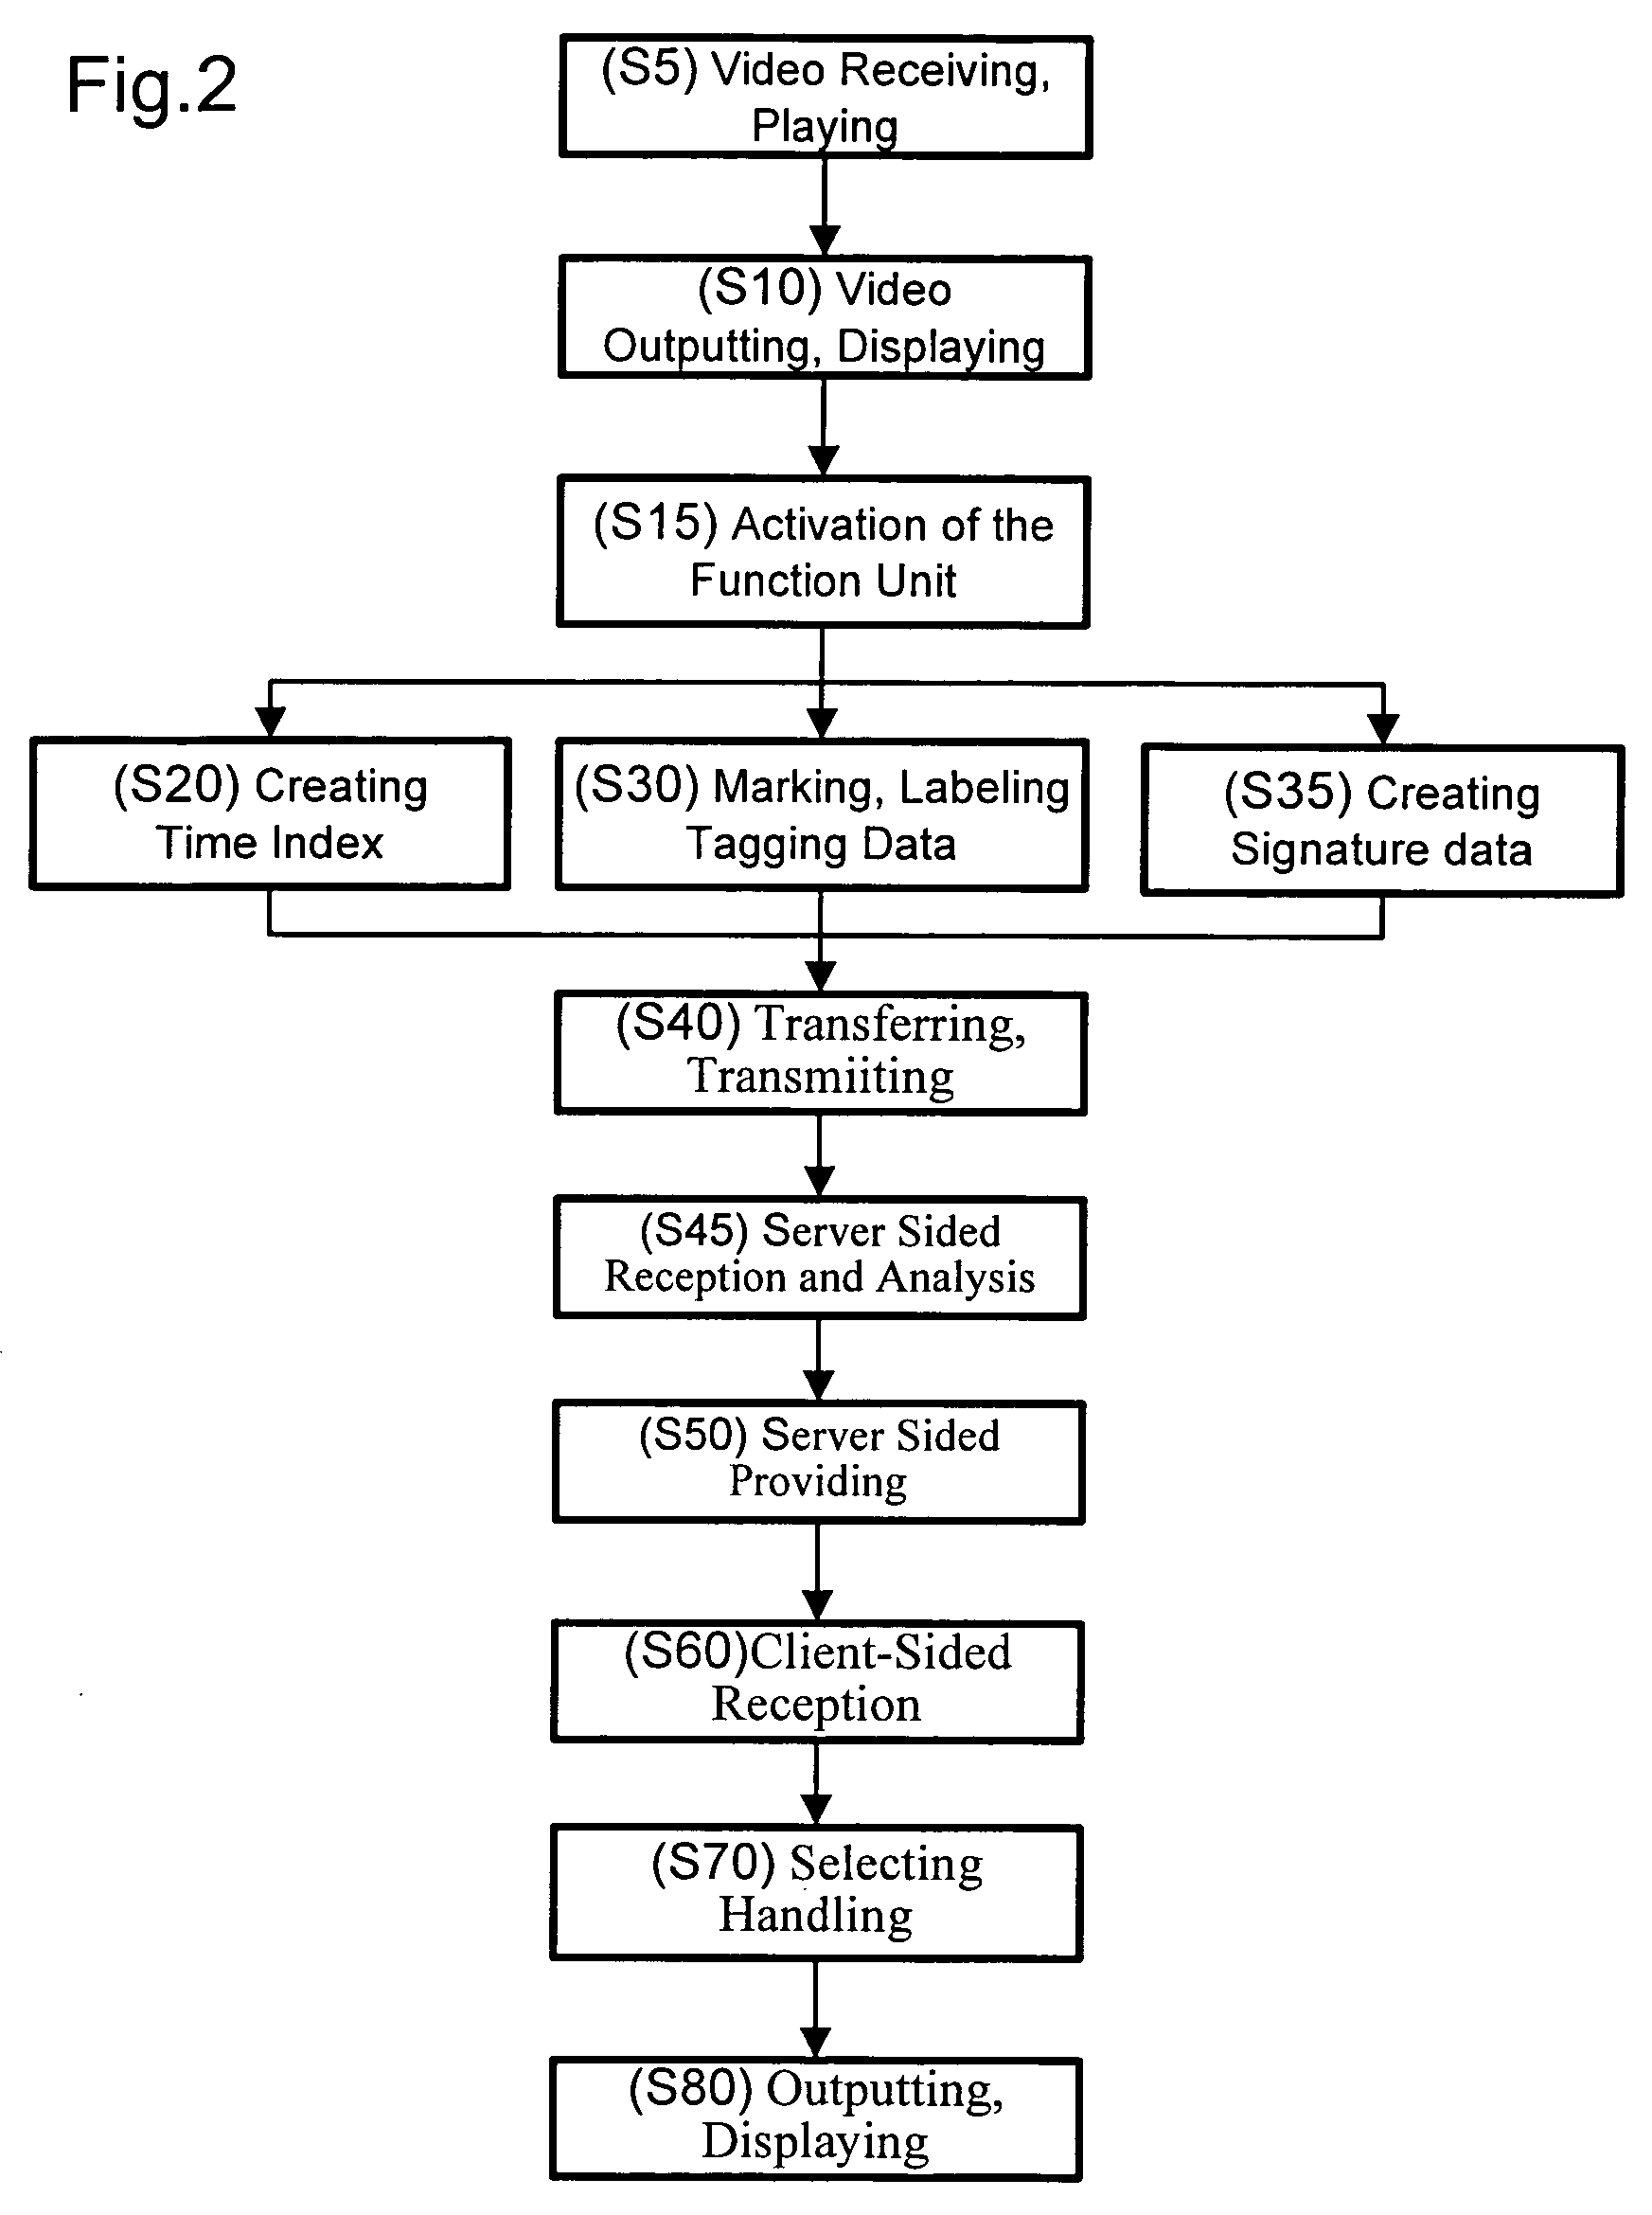 Appliance and method for client-sided requesting and receiving of information